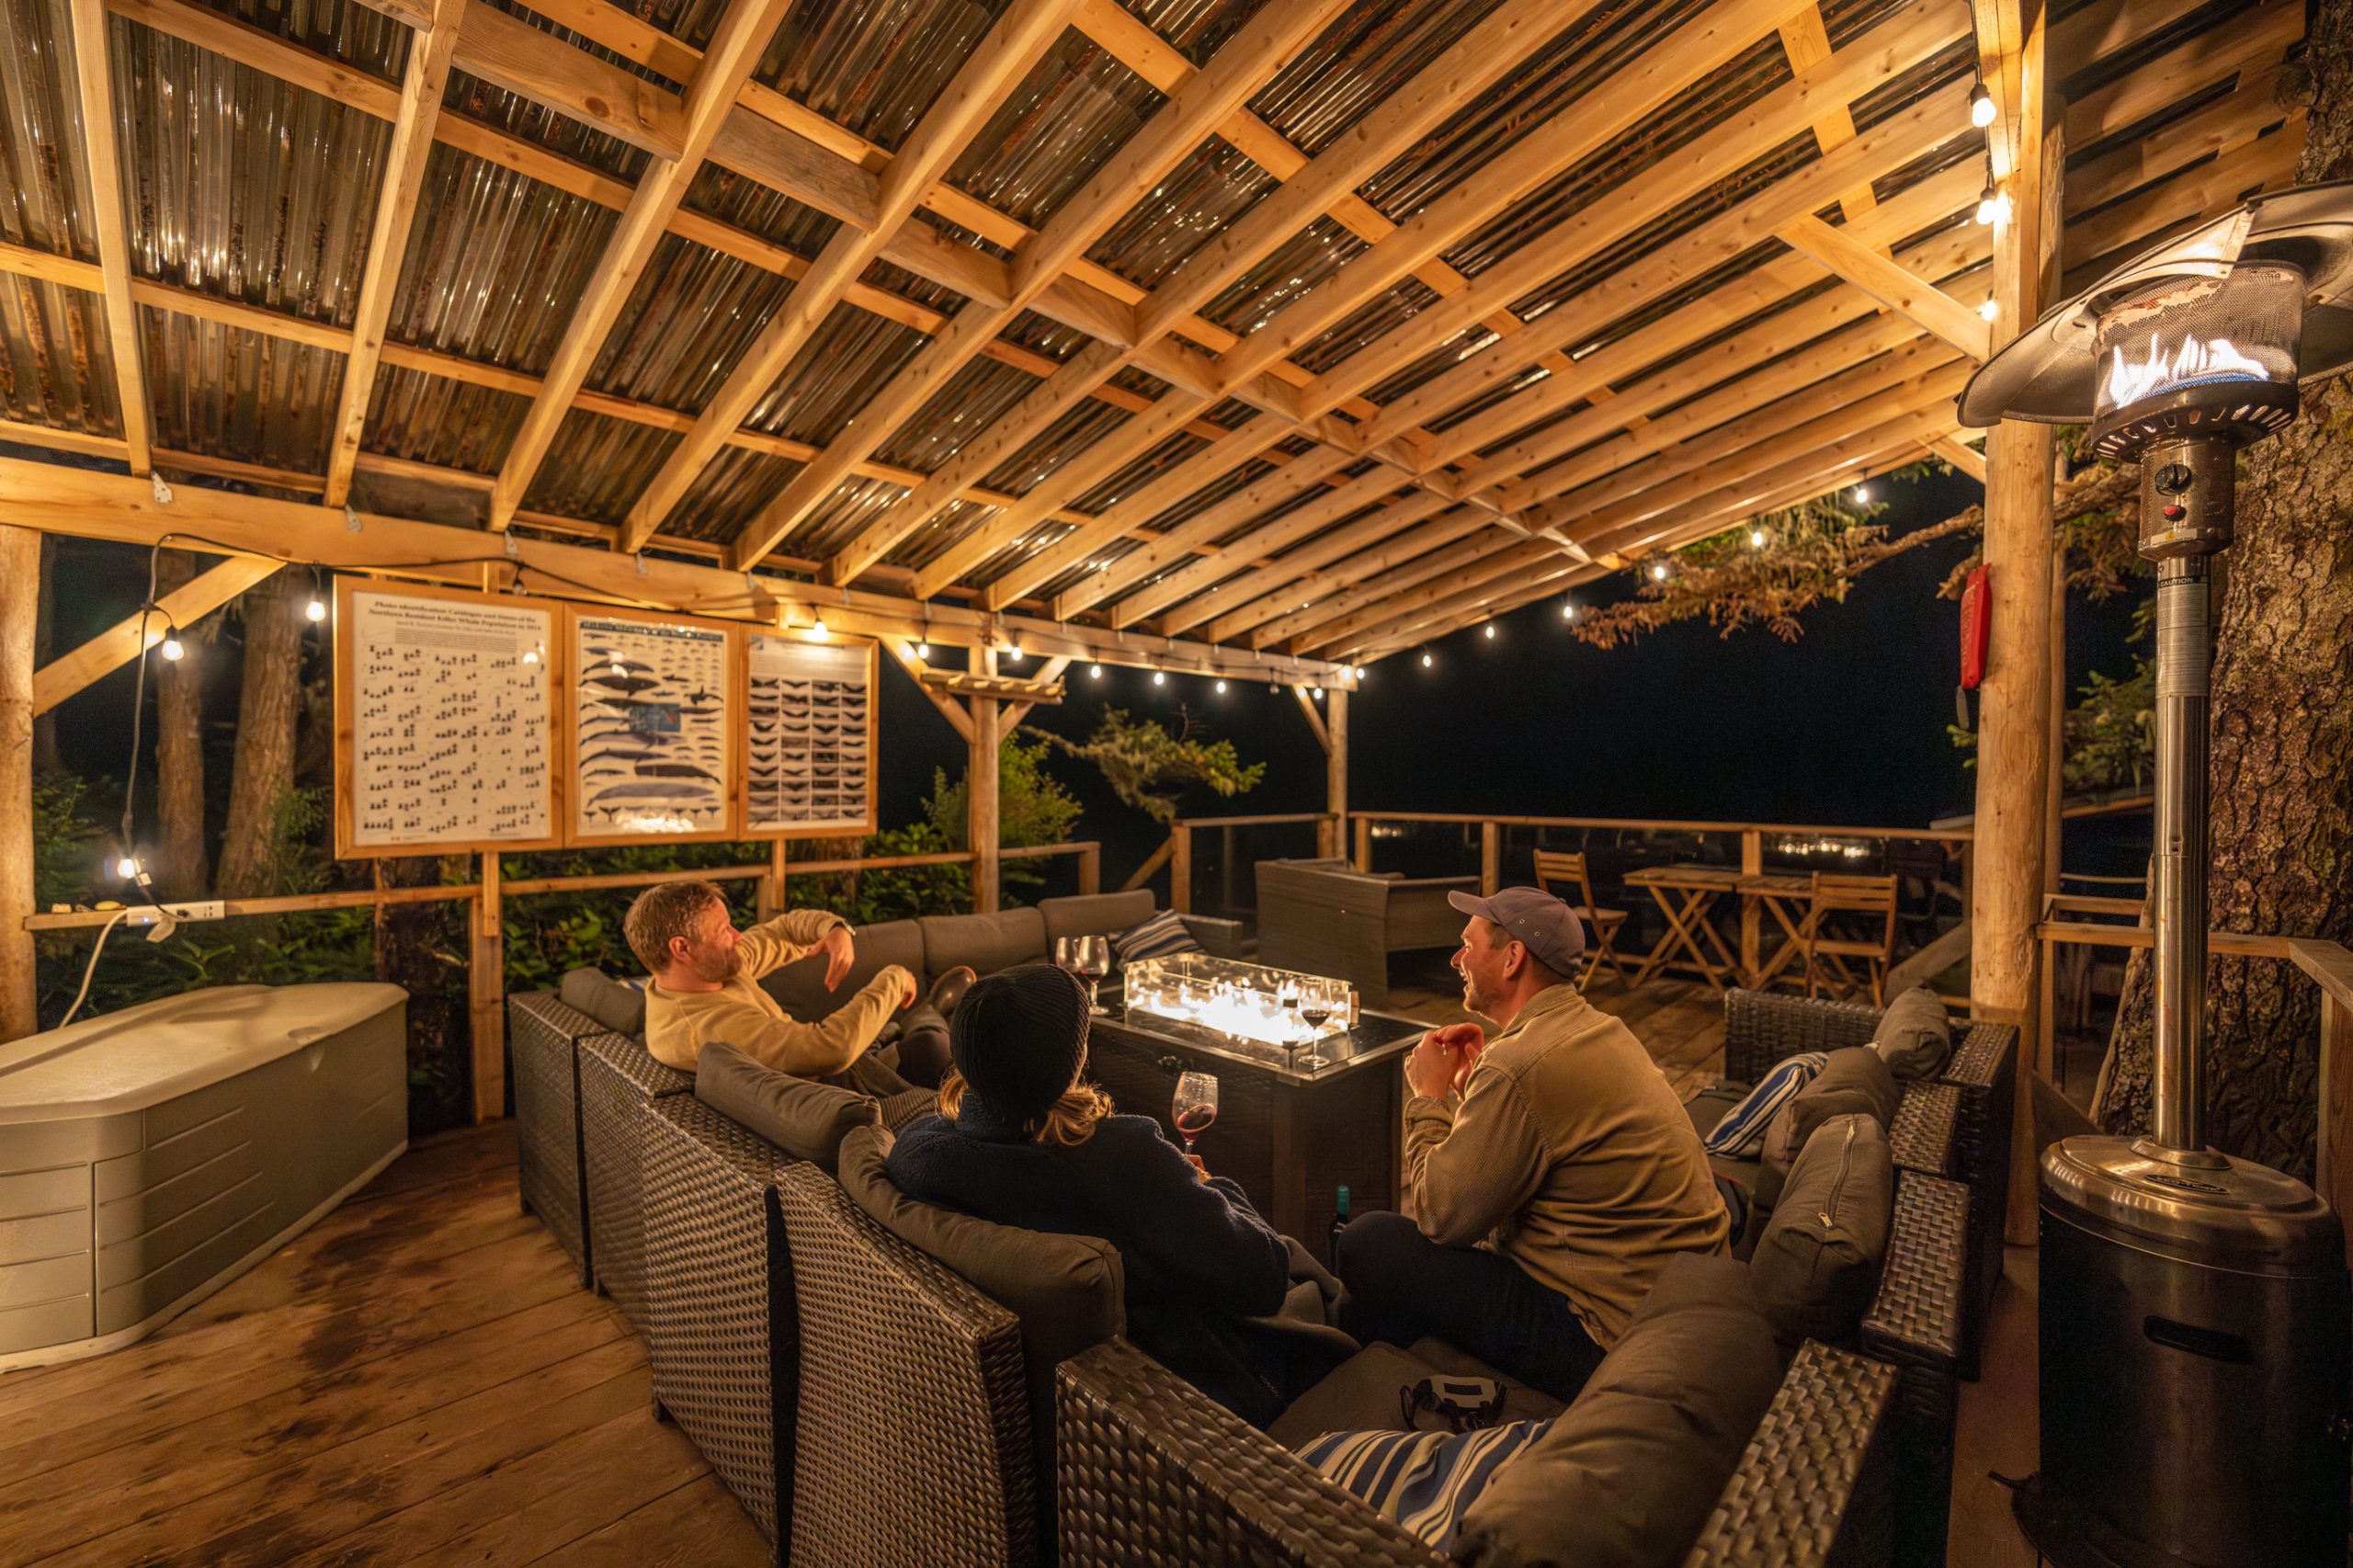 Guests hanging out in an outdoor lounge at night